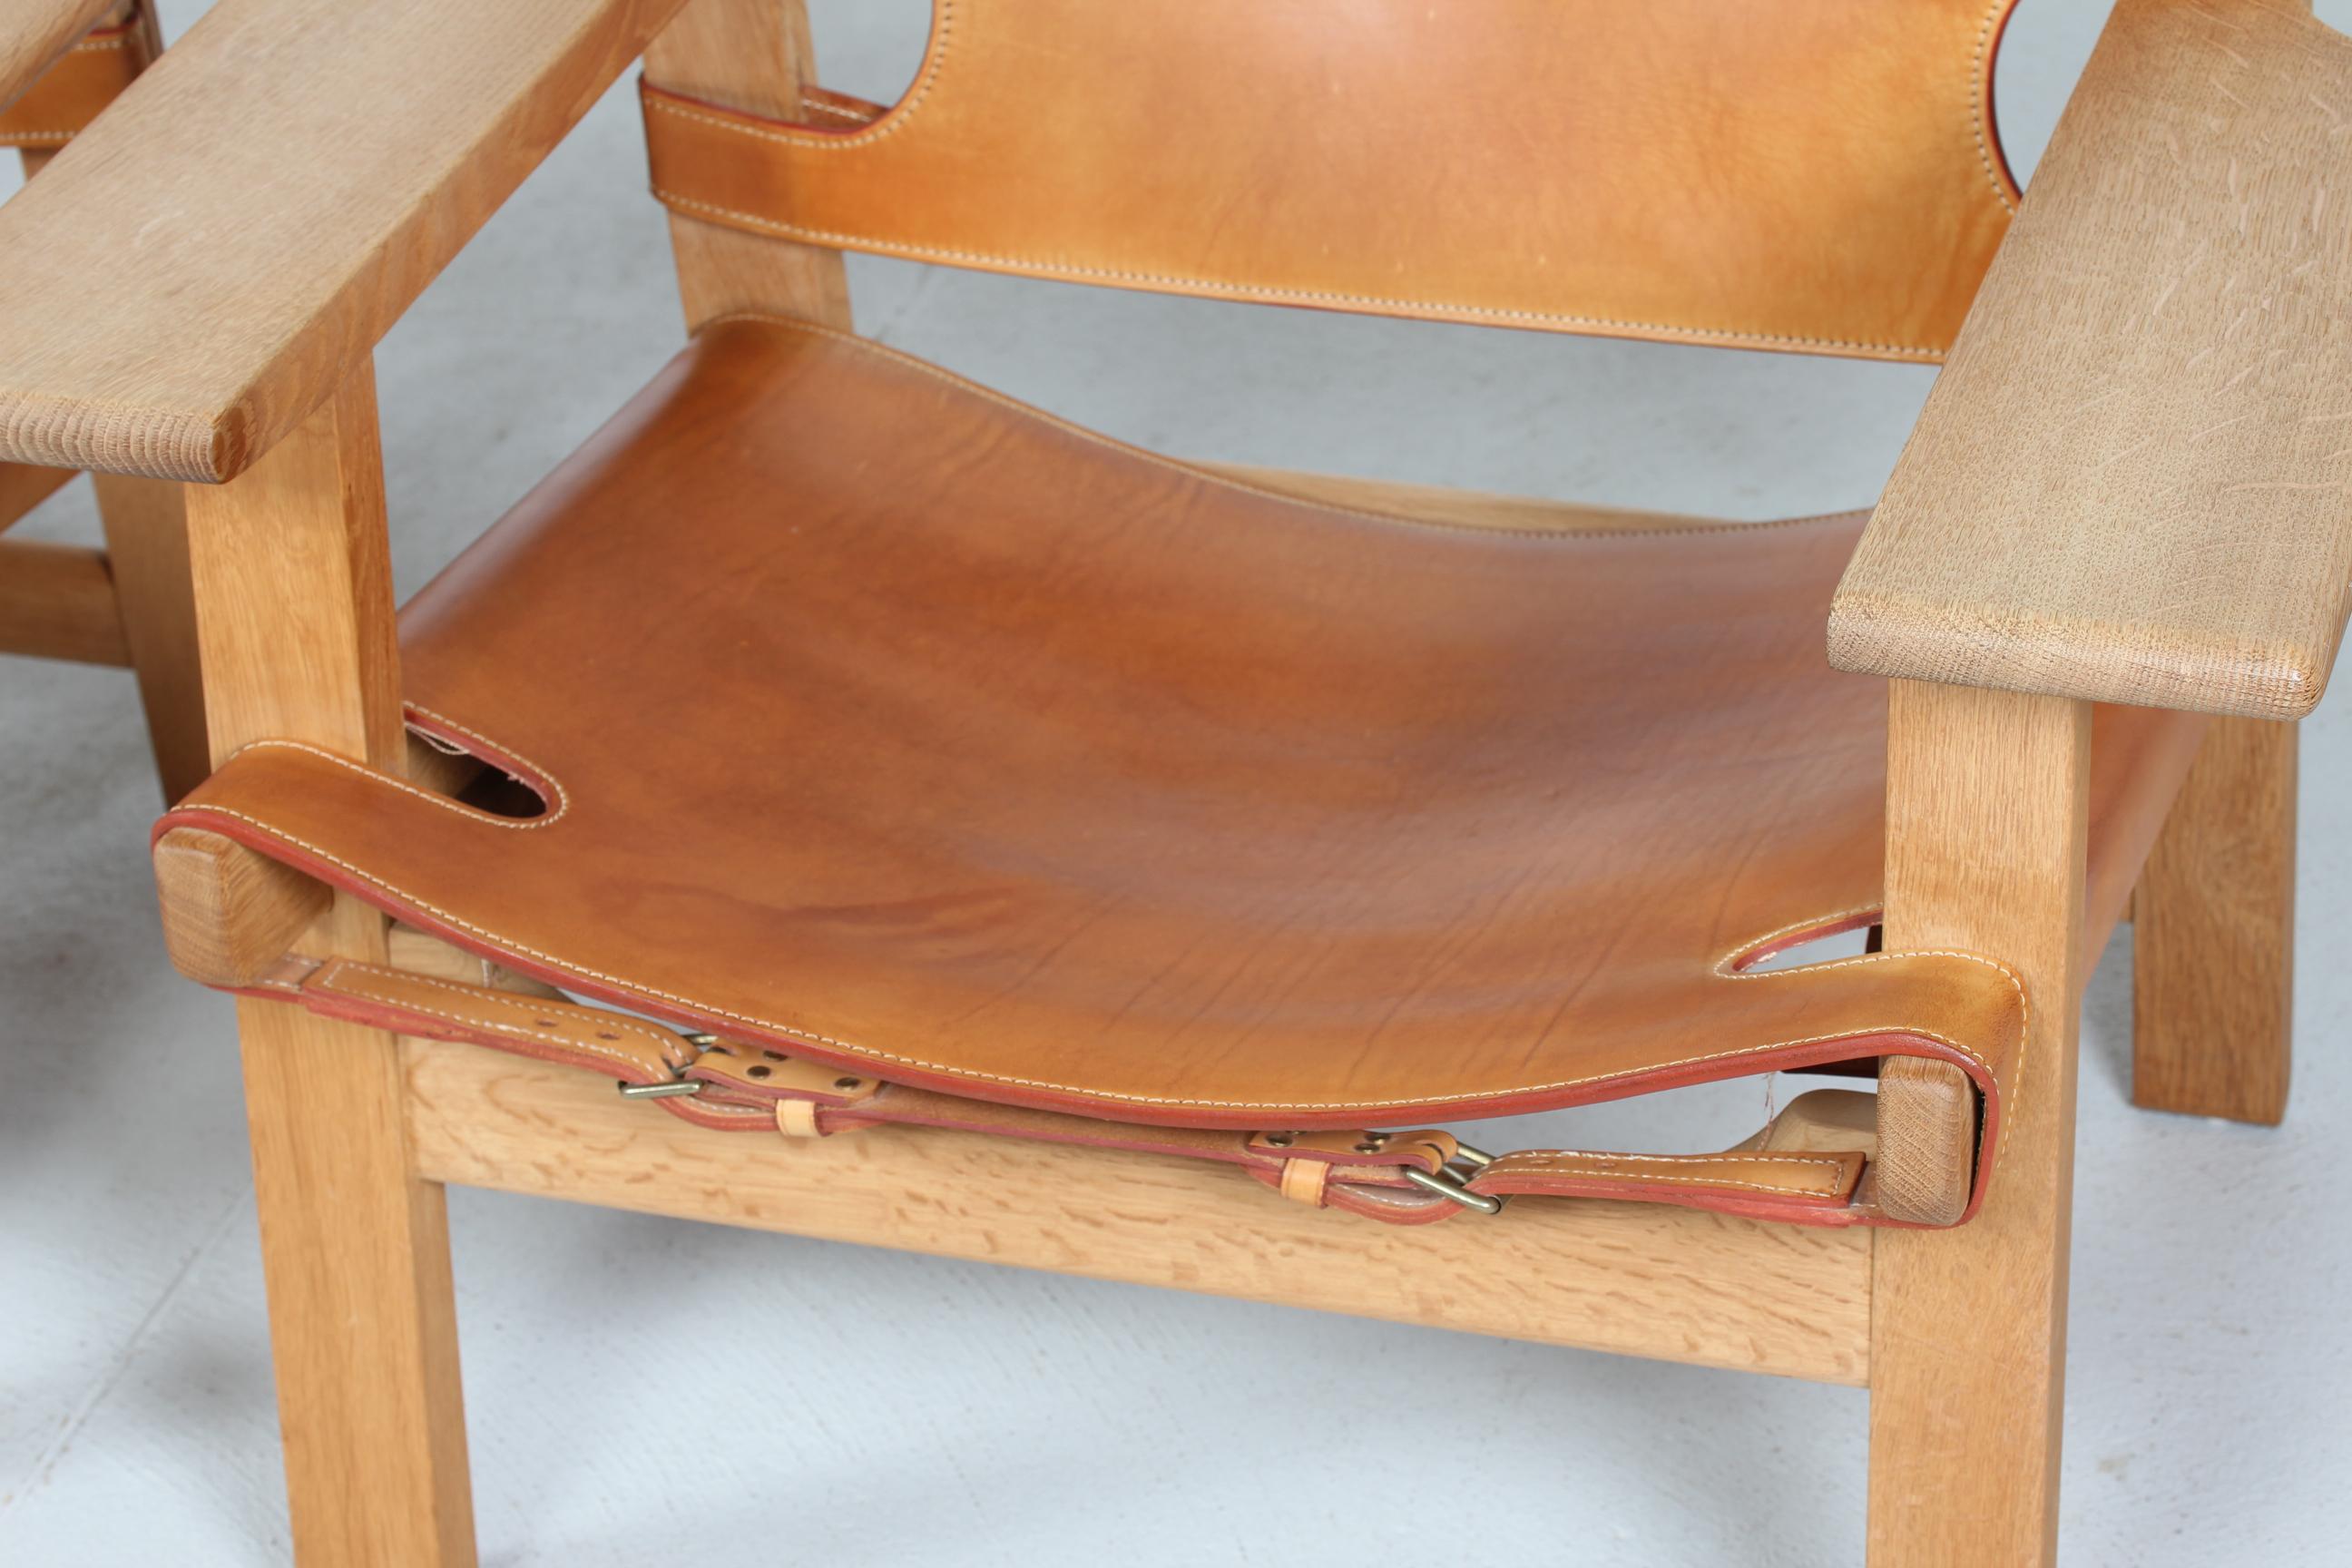 20th Century Børge Mogensen Spanish Chair 2226 Oak with Cognac Leather, Fredericia Furniture